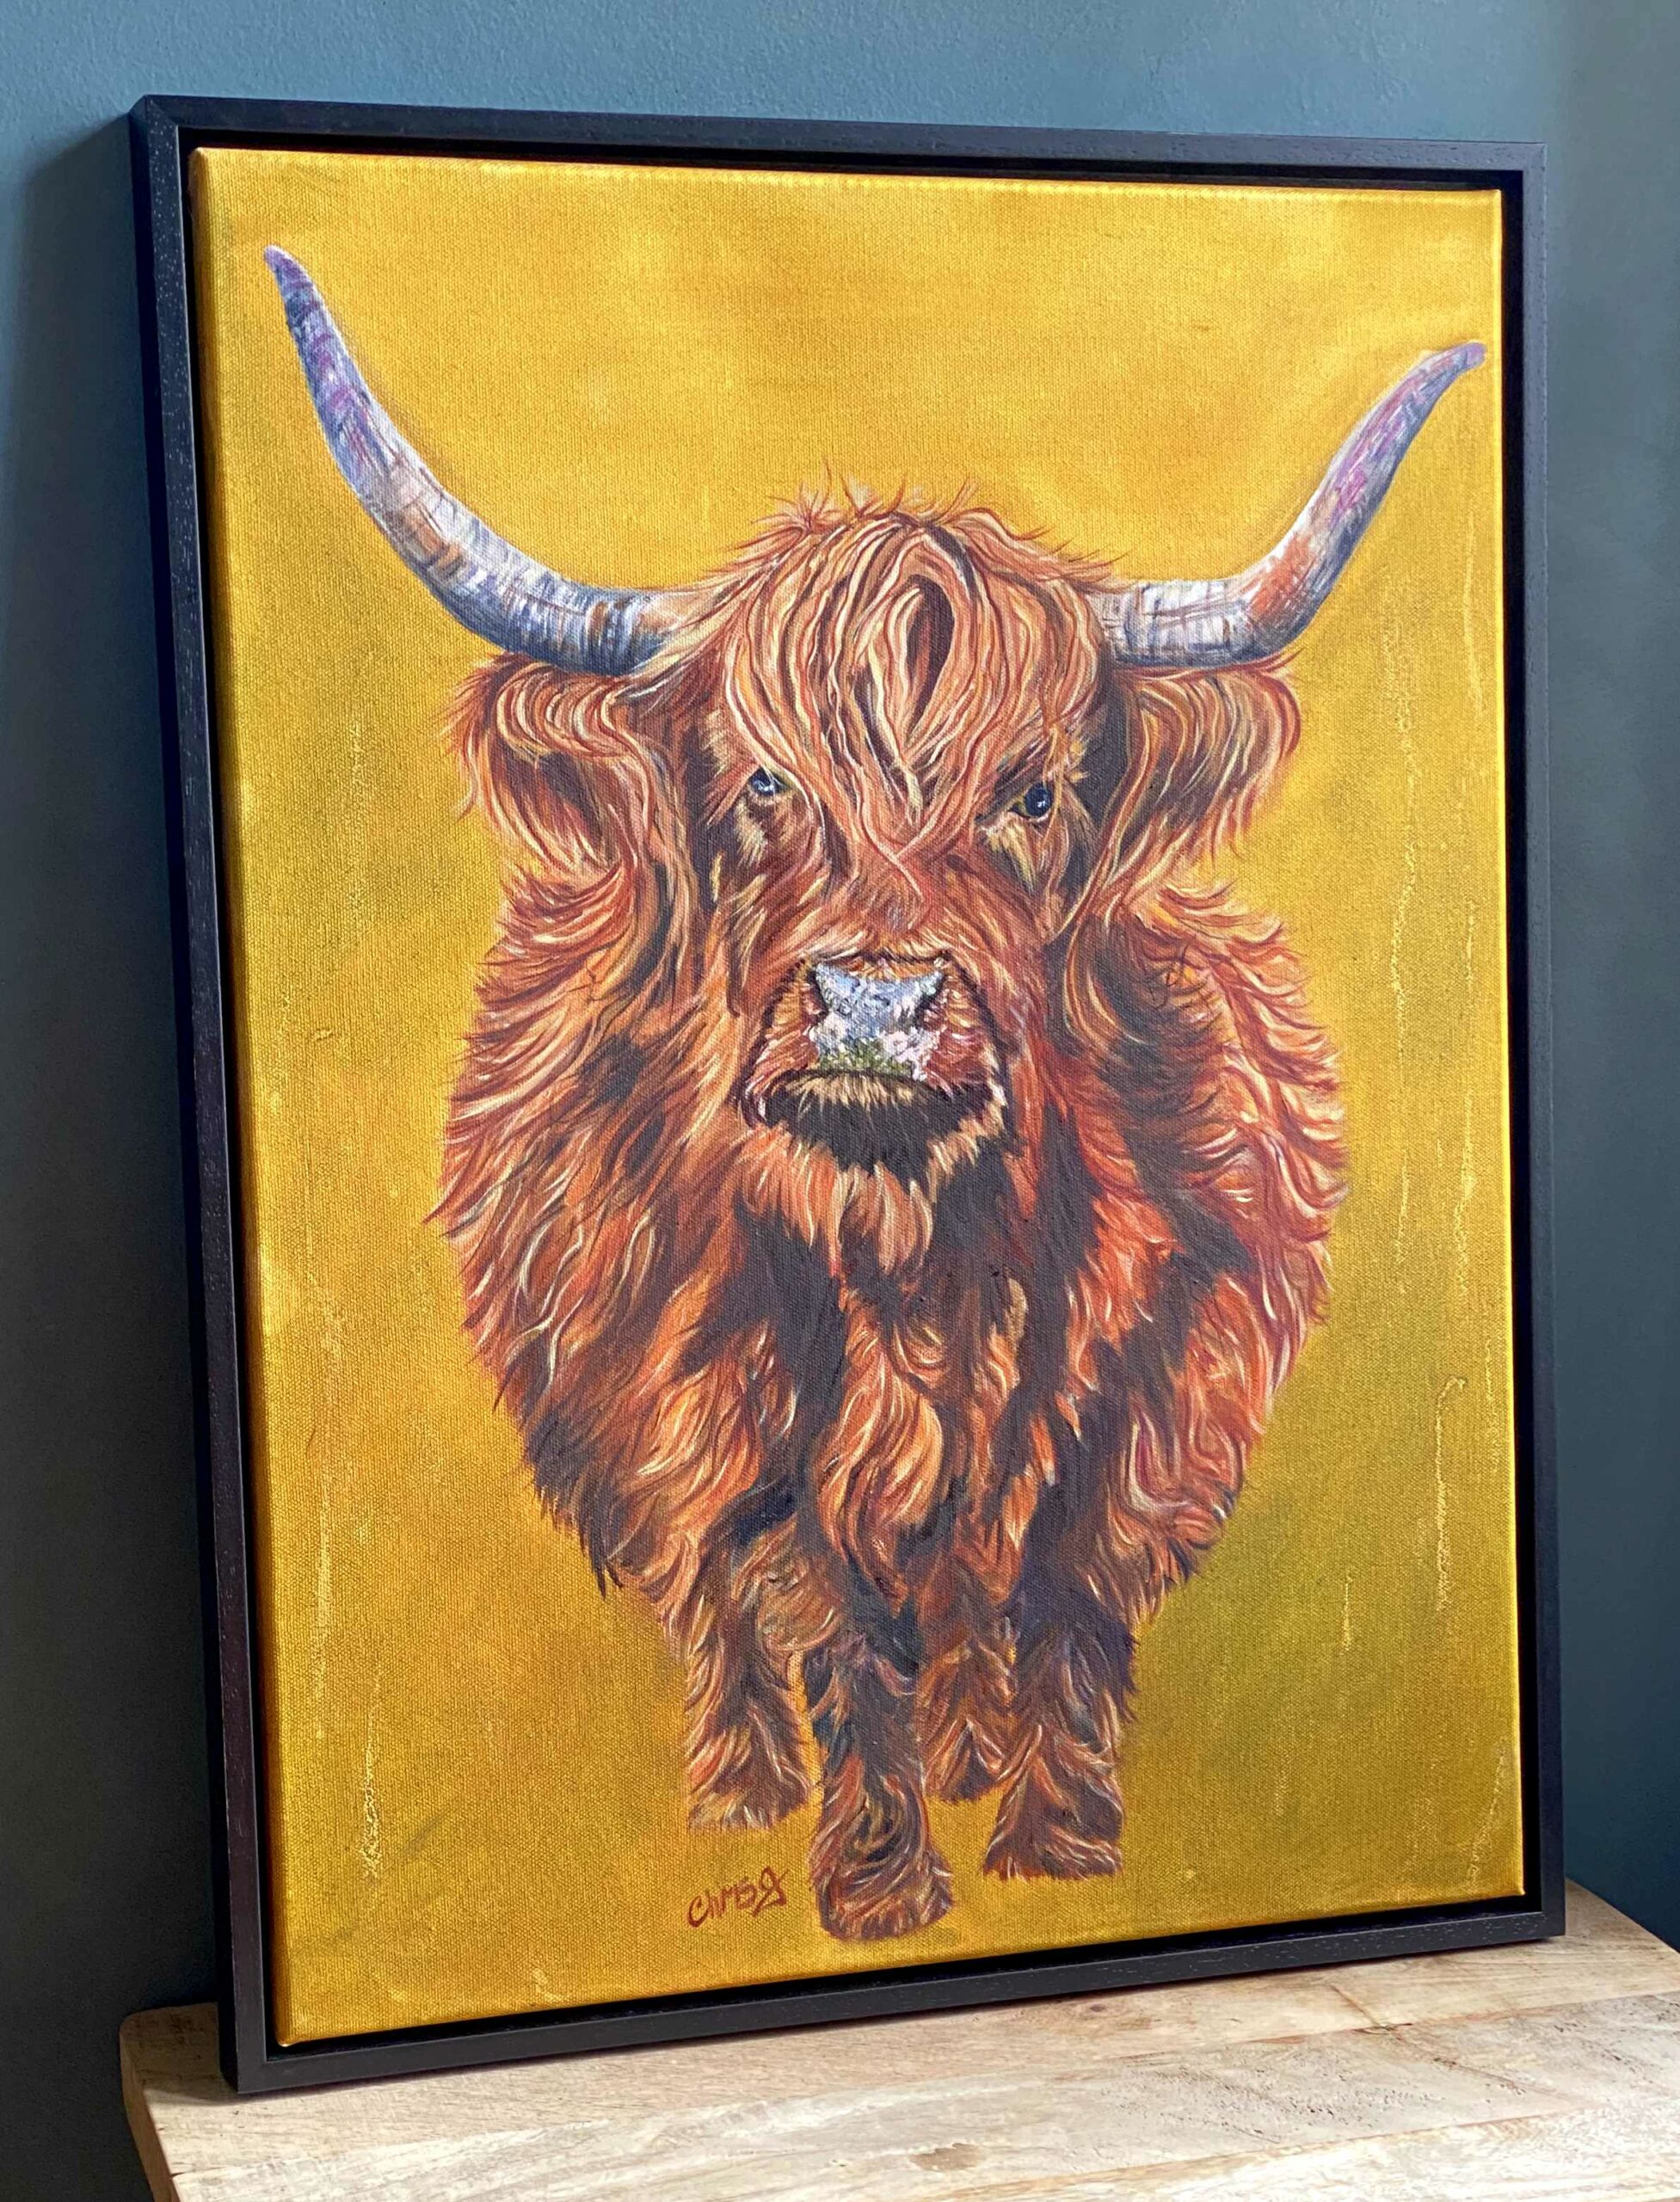 Harriet is a big highland cow full cow in oils rust to brown the background in a bold bright mustard colour